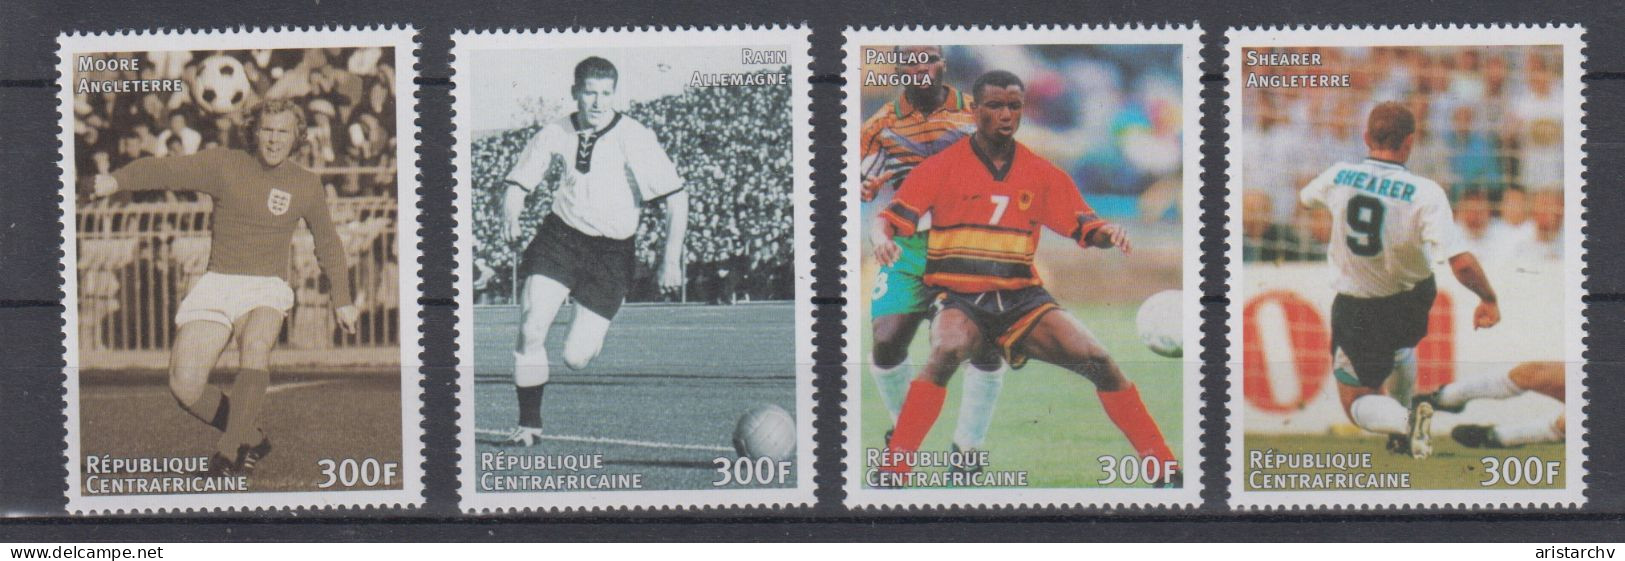 CENTRAL AFRICAN REPUBLIC 1998 FOOTBALL WORLD CUP 2 S/SHEETS SHEETLET AND 4 STAMPS - 1998 – Francia